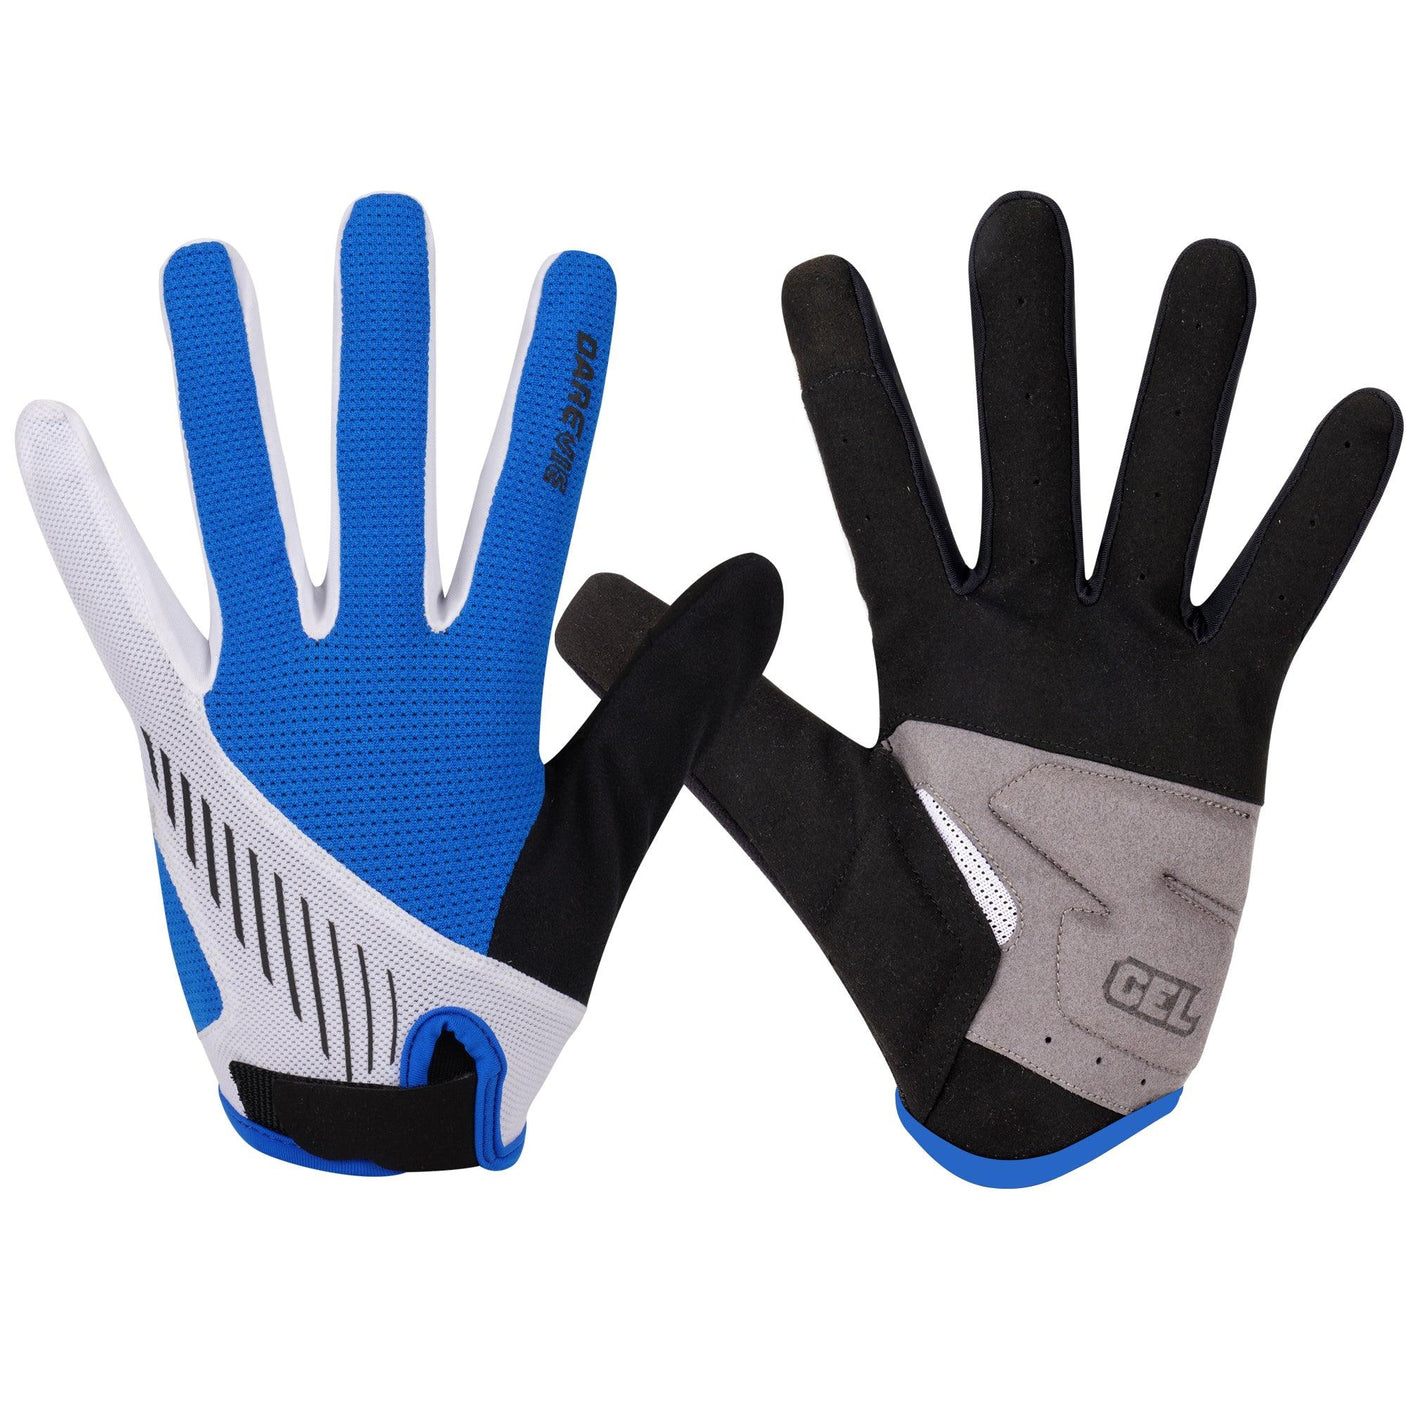 SWIFTSHIELD FULL FINGER CYCLING GLOVES-Blue- Darevie Shop